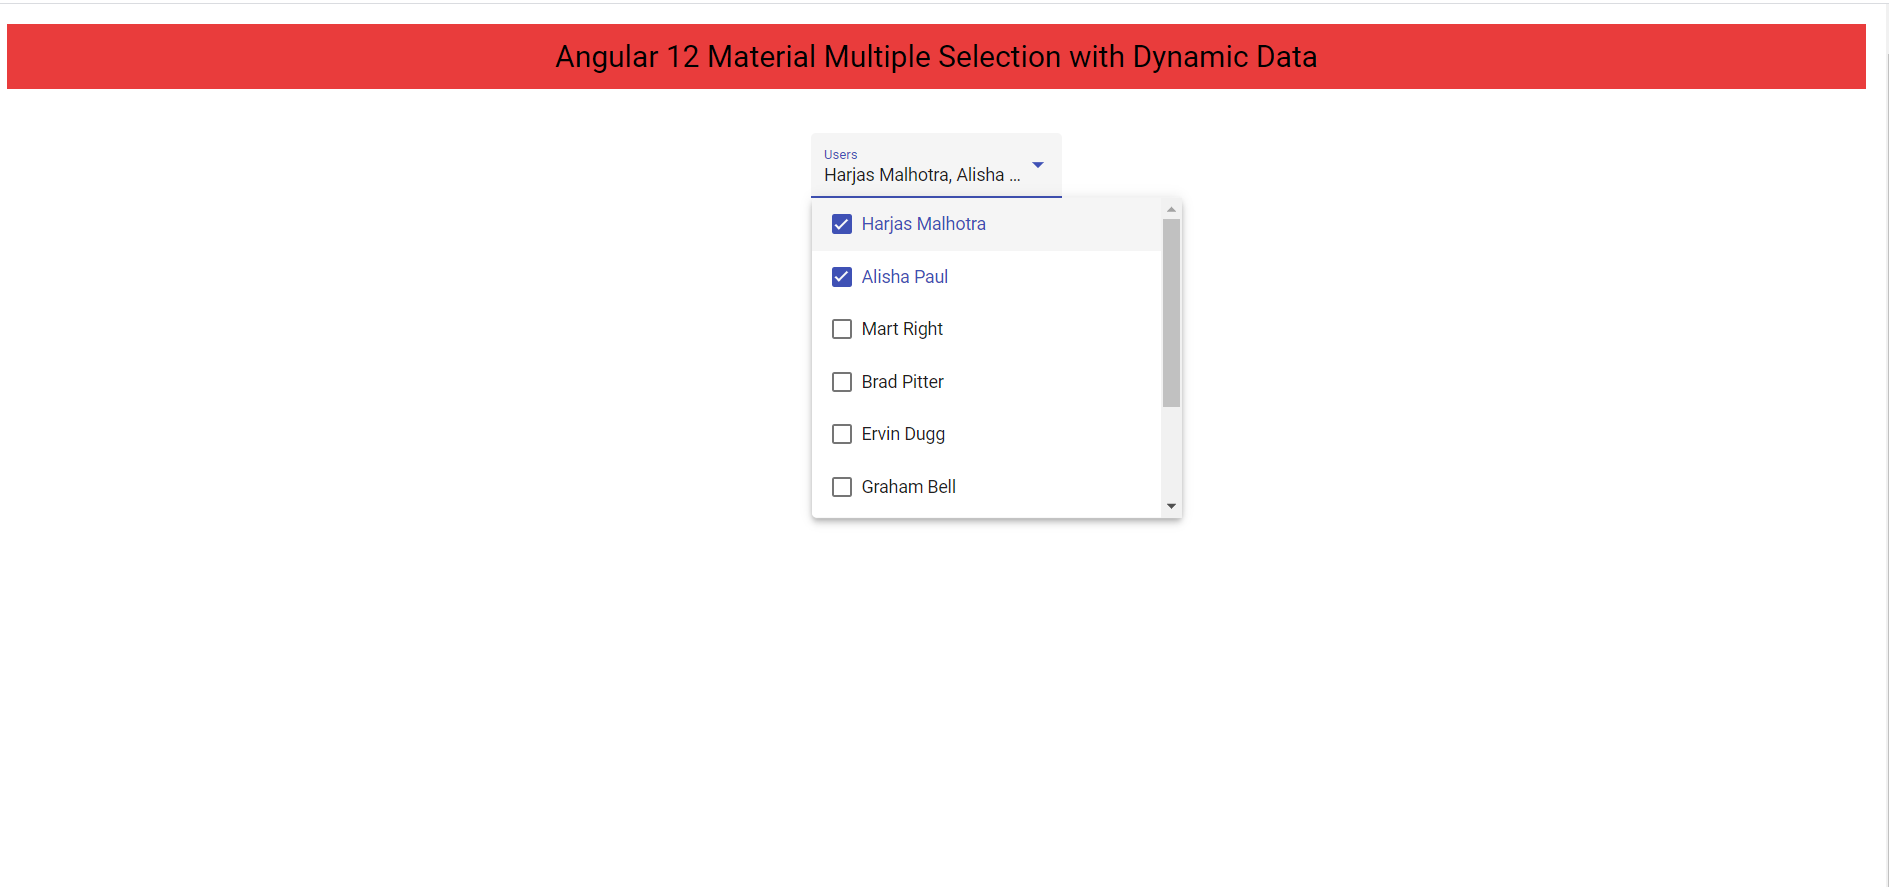 Angular 12 Material Multiple Selection with Dynamic Data